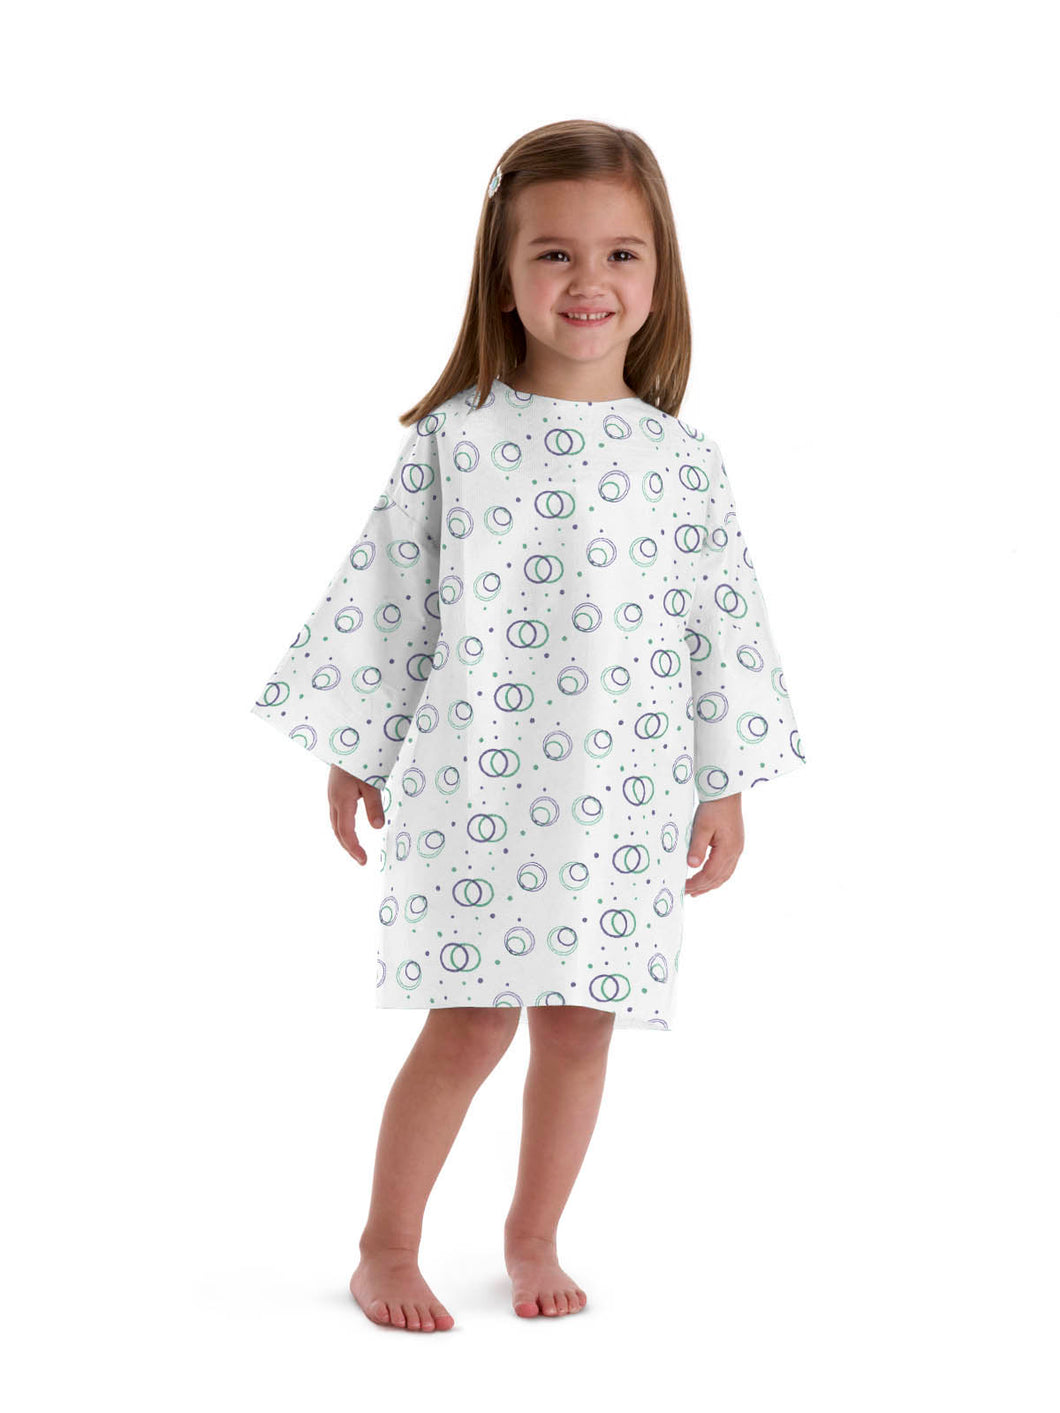 50/CS Medline Disposable Pediatric Patient Gowns, 1-4 Years